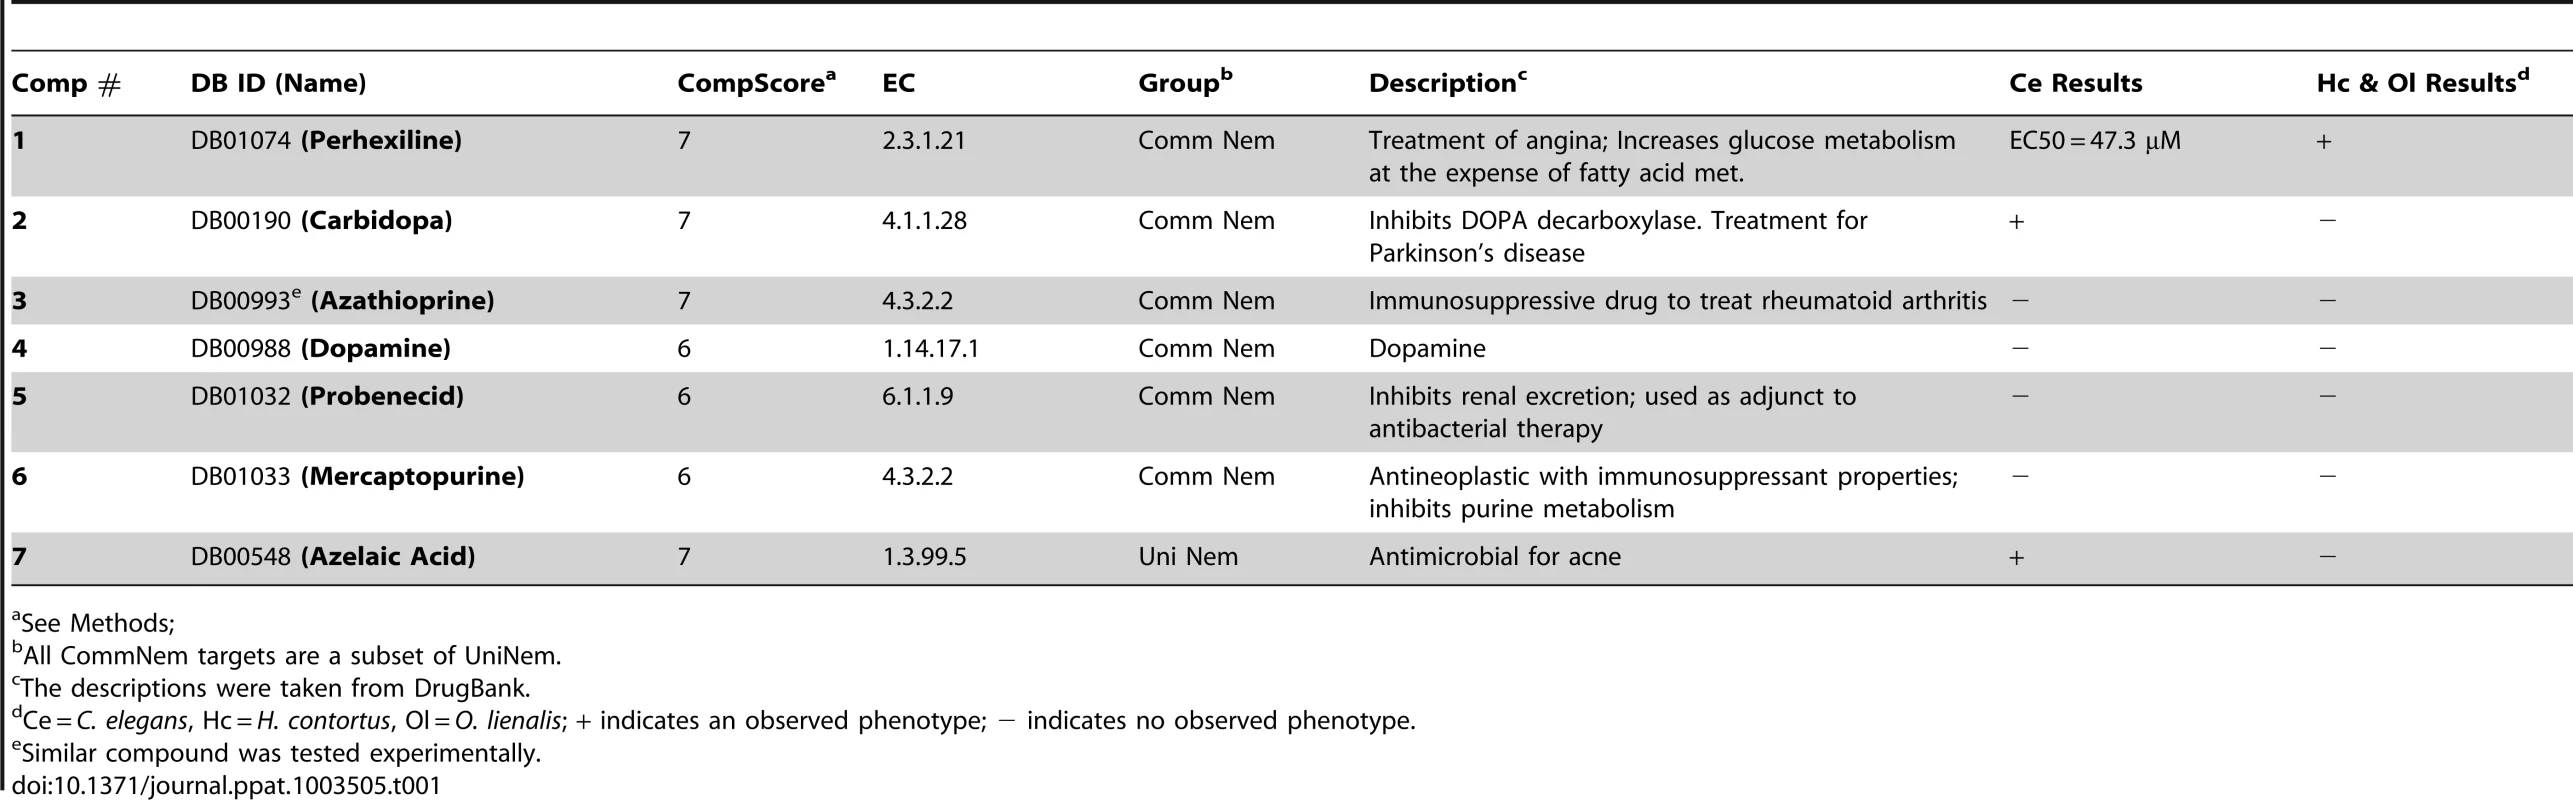 Prioritized list of drug-like compounds from DrugBank that can potentially be repositioned or further optimized for nematodes.